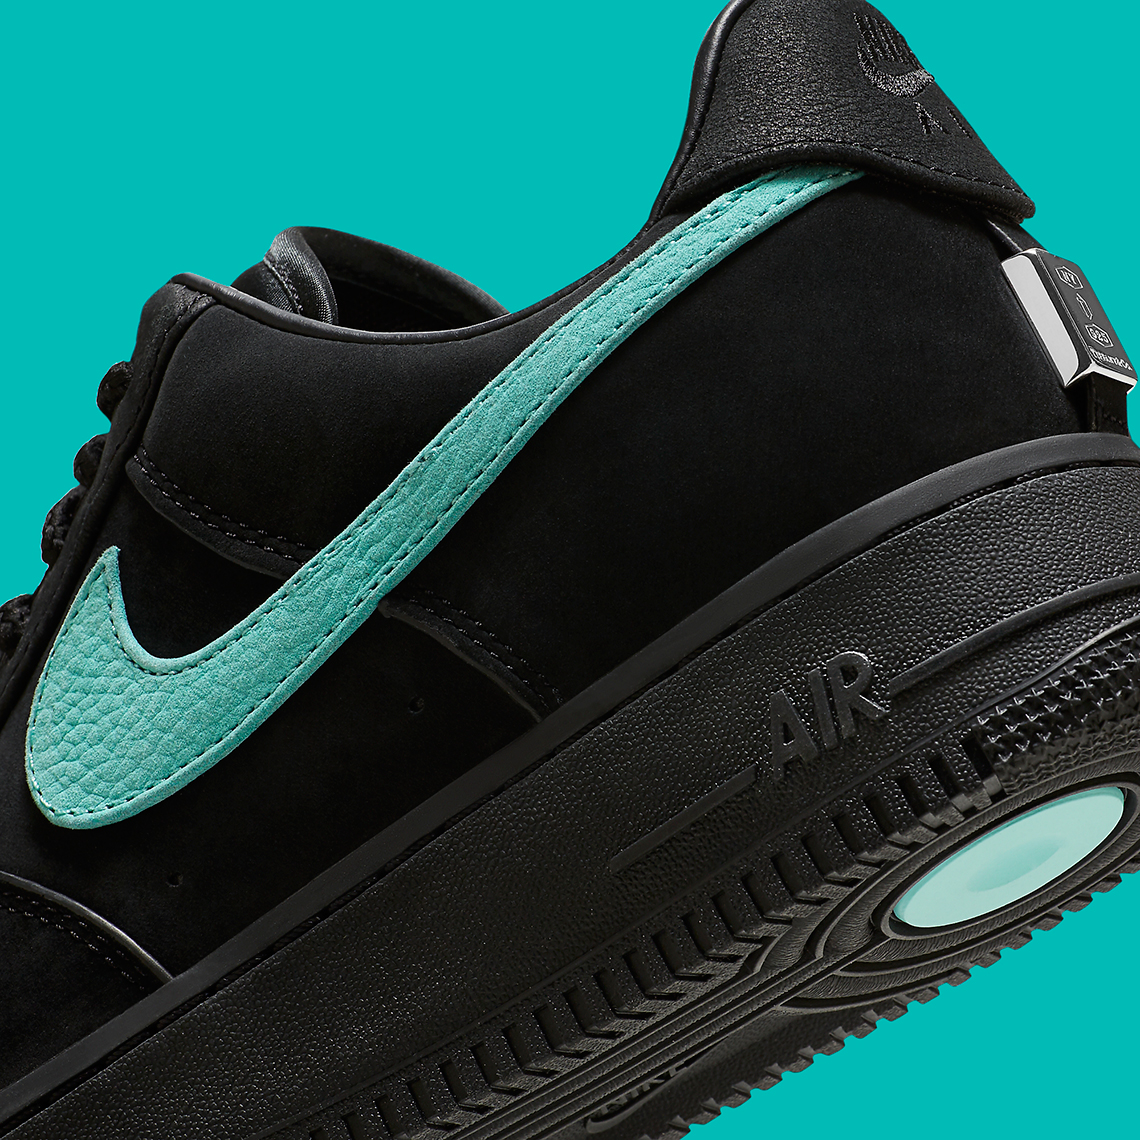 tiffany nike color air force 1 DZ1382 001 release date 8